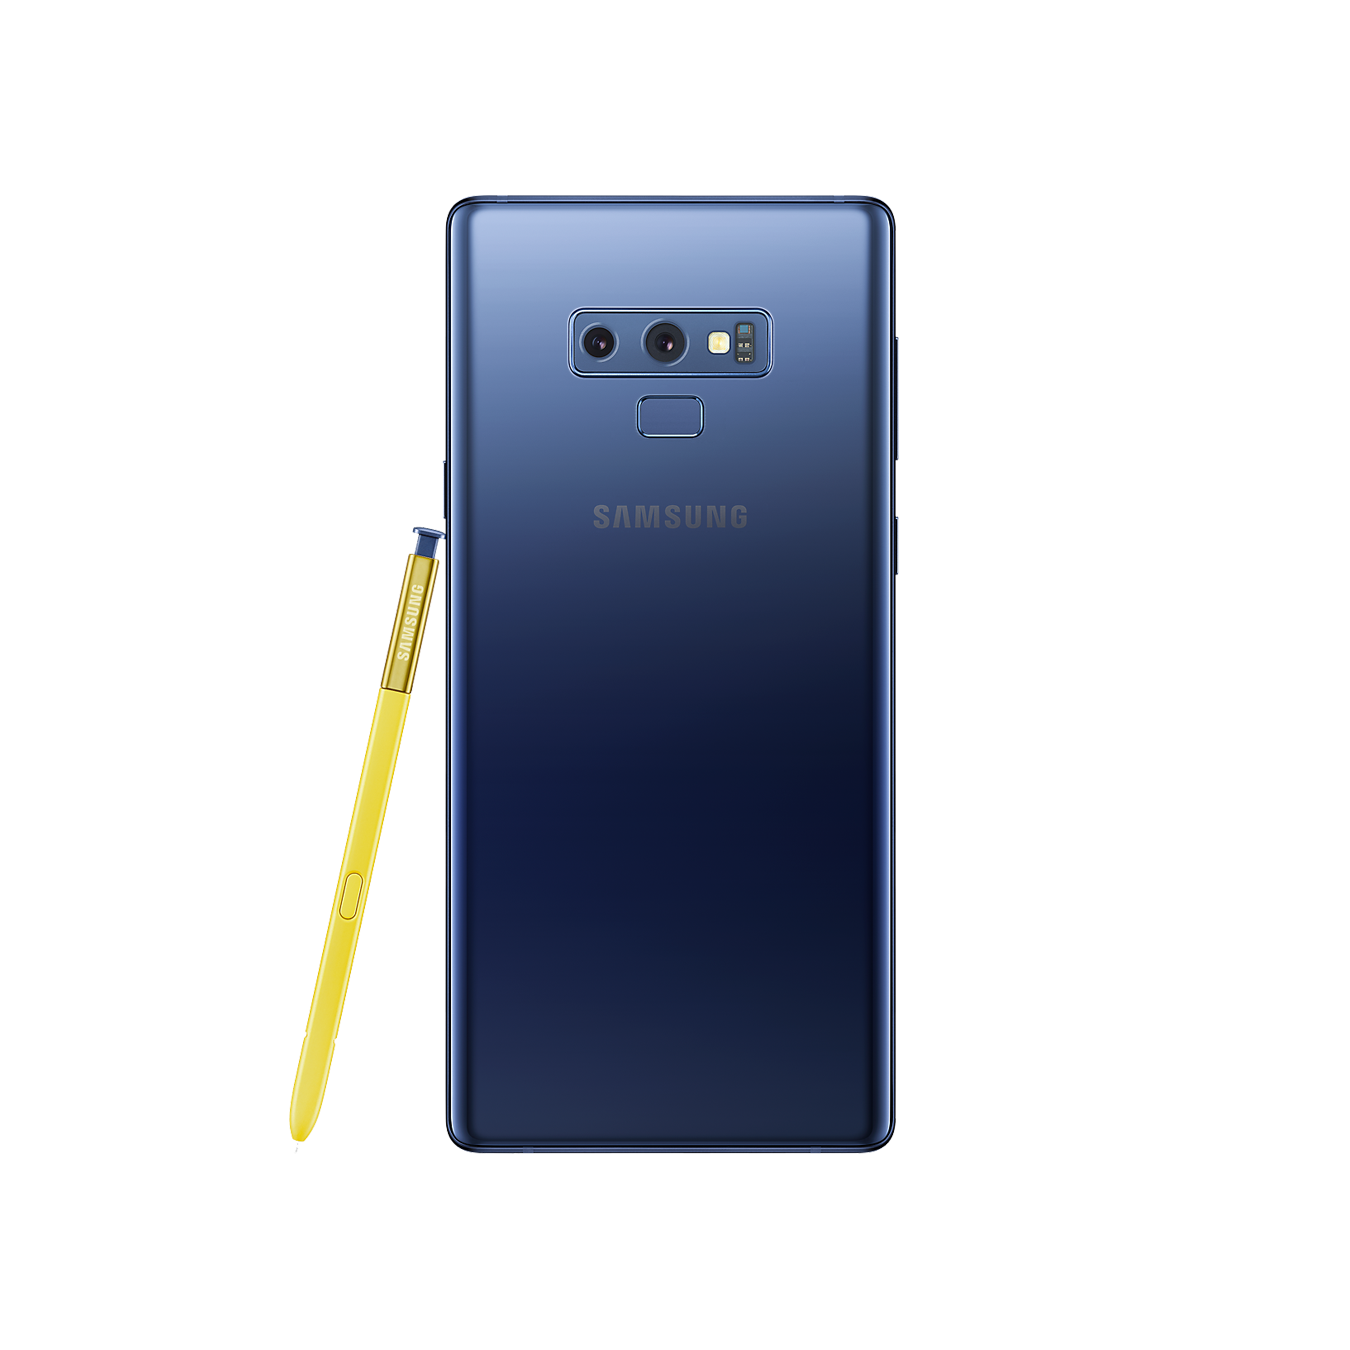 Samsung Galaxy Note9 network unlock, remove SIM restrictions for global use, available at cleanimei.com